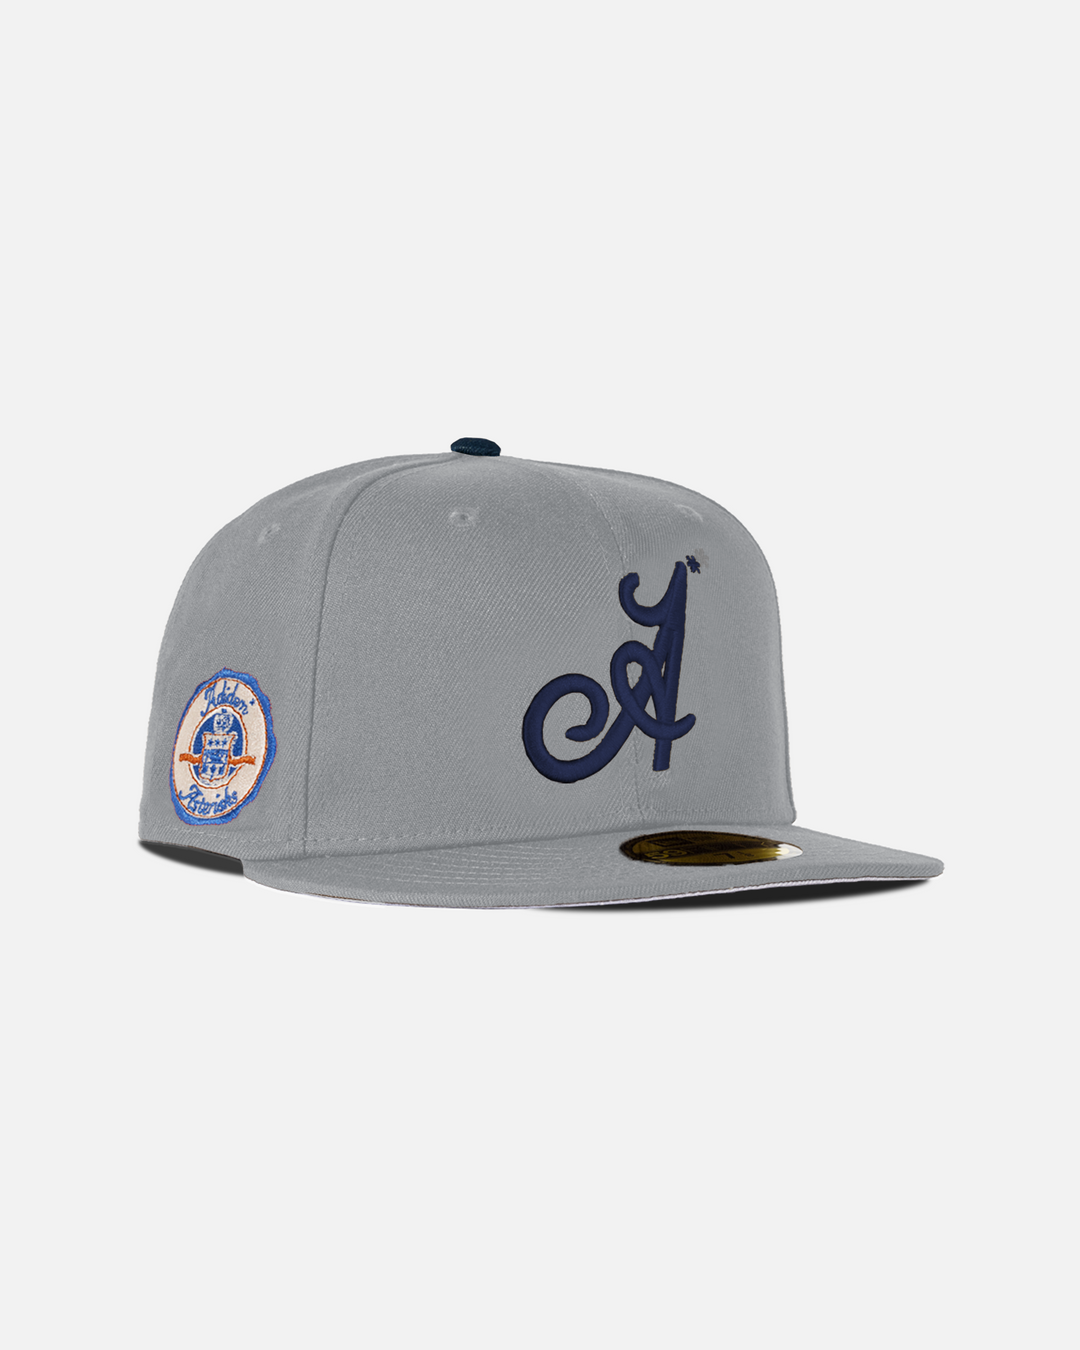 New Era Fitted - Georgetown (Series C)